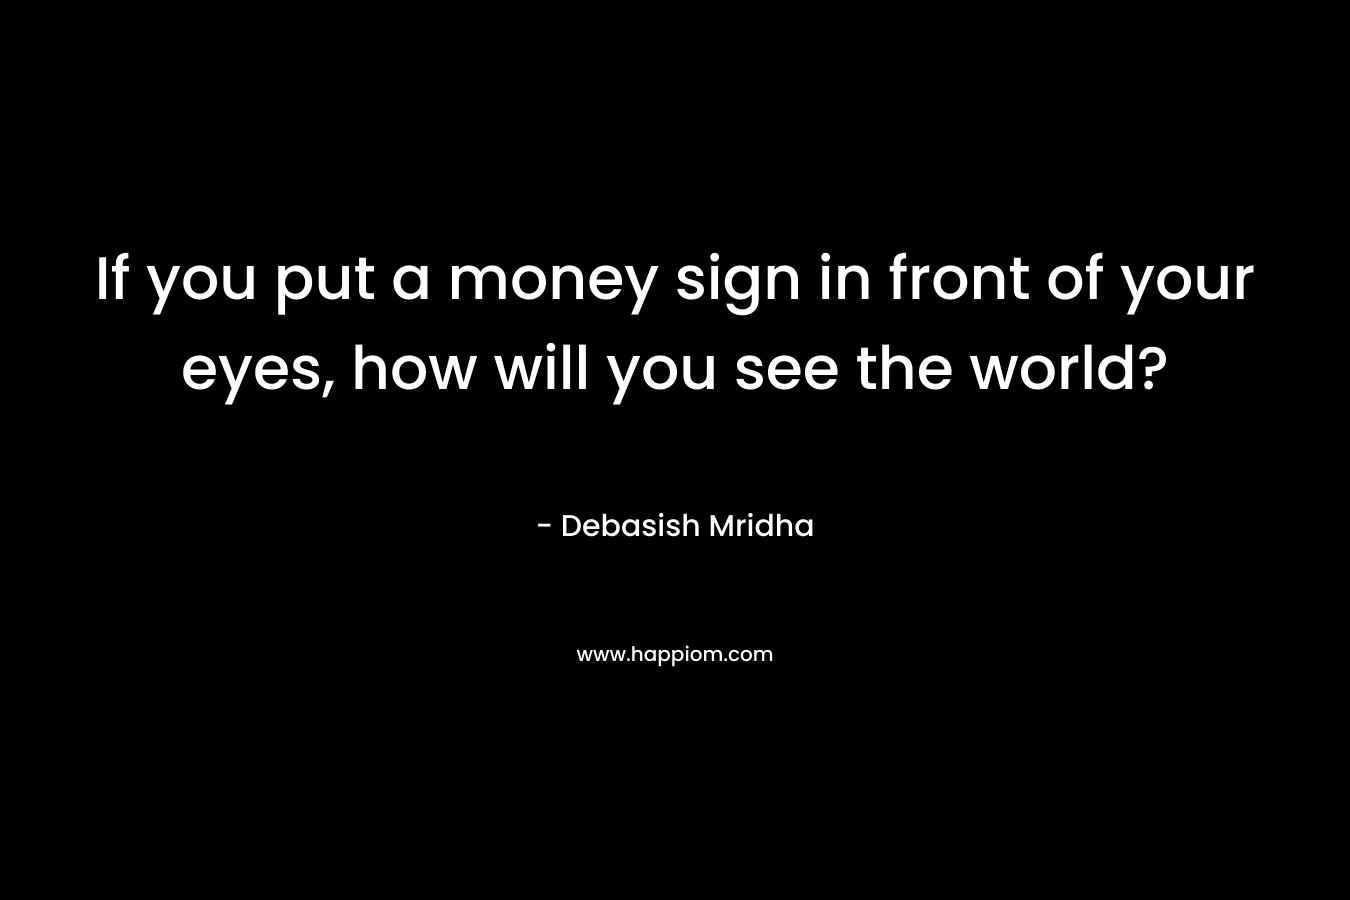 If you put a money sign in front of your eyes, how will you see the world?